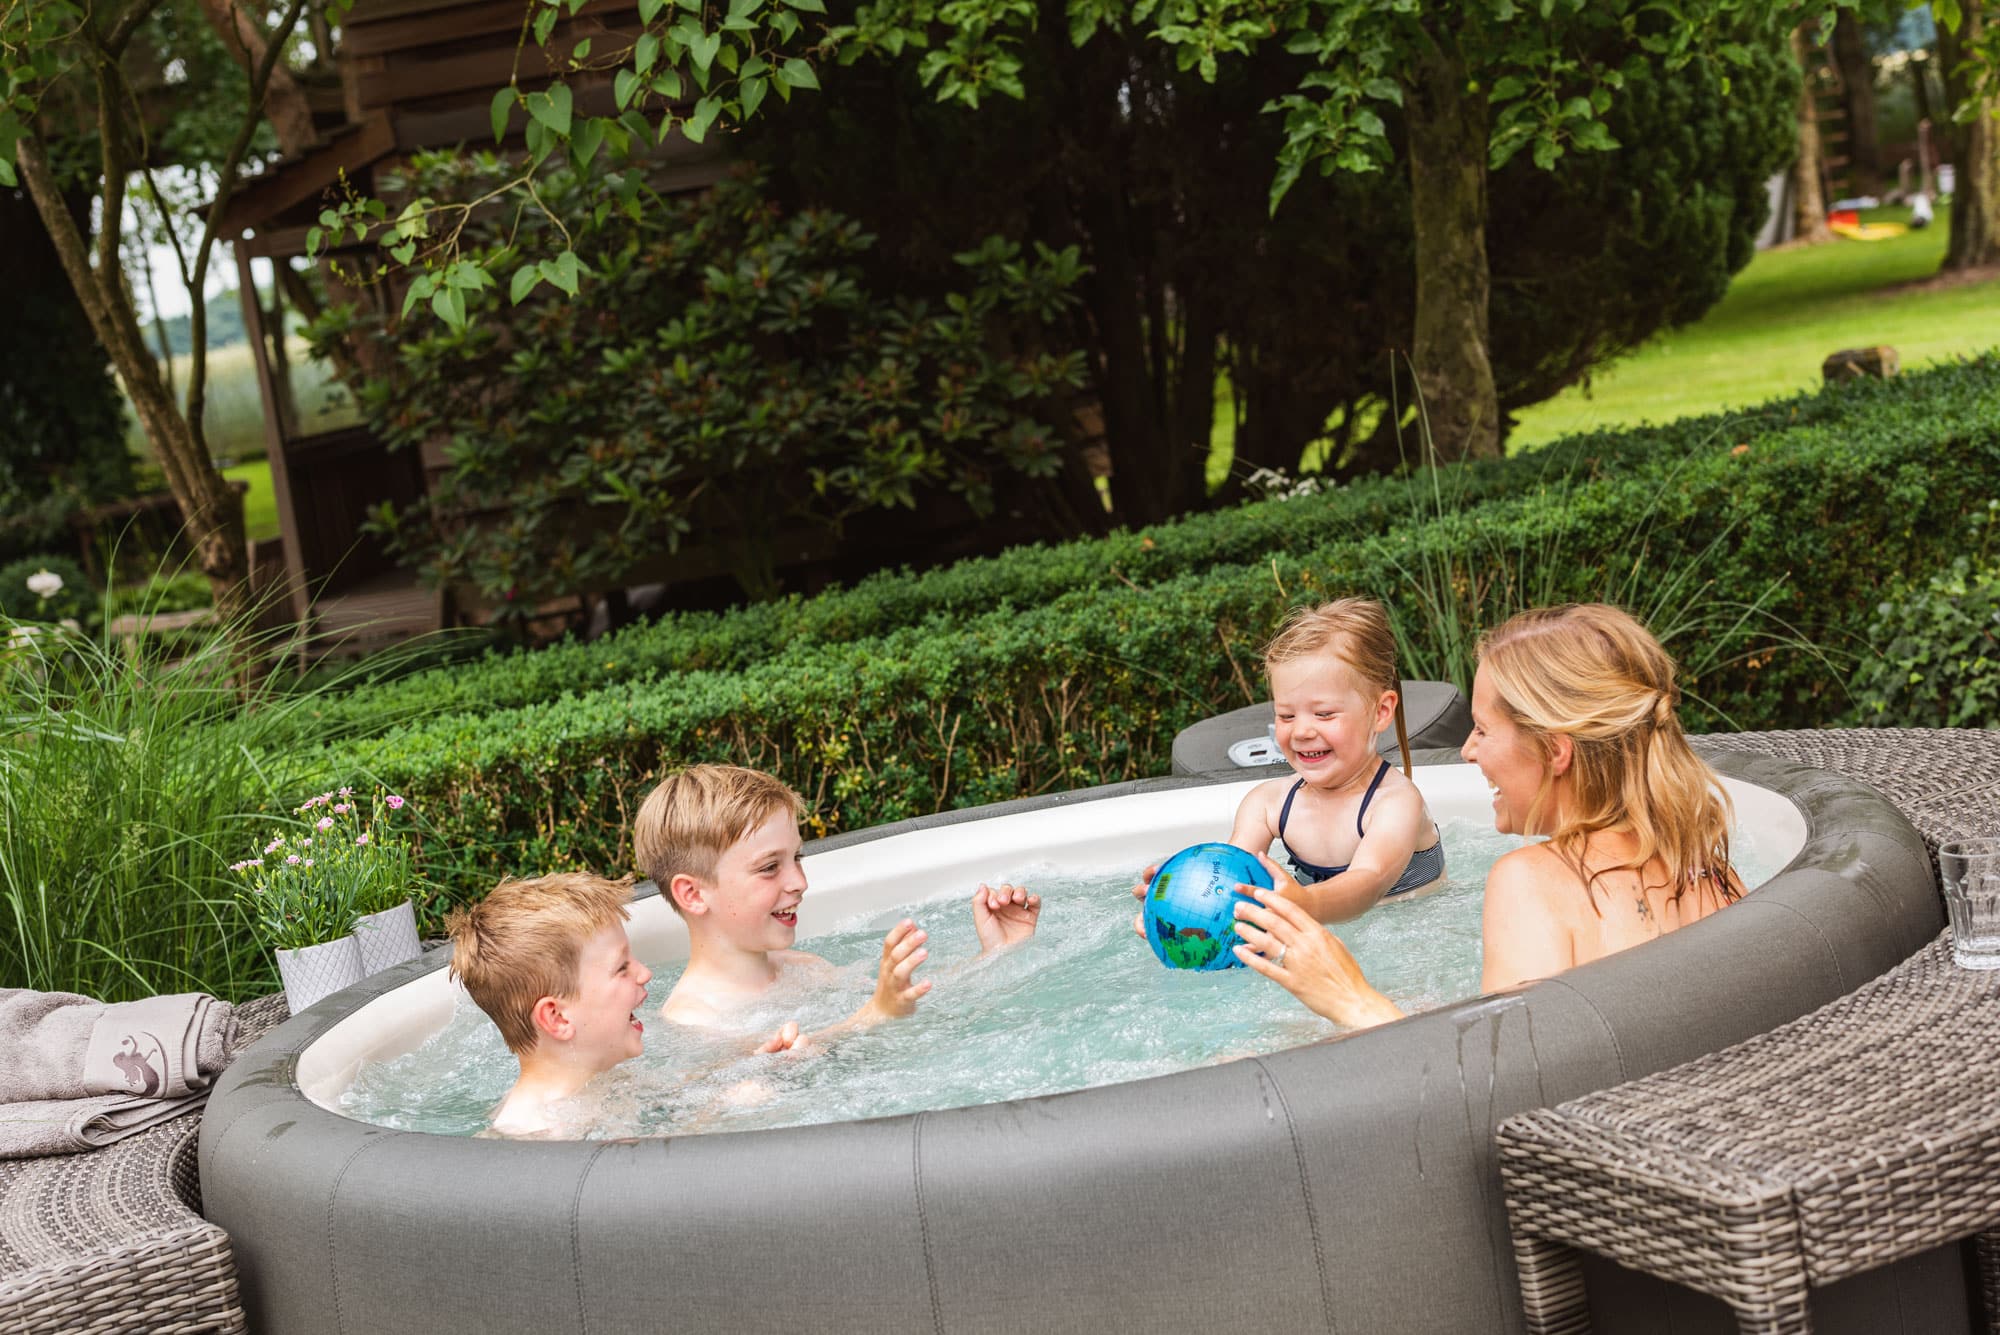 A Softub Spa Is The Perfect Gift For The Whole Family